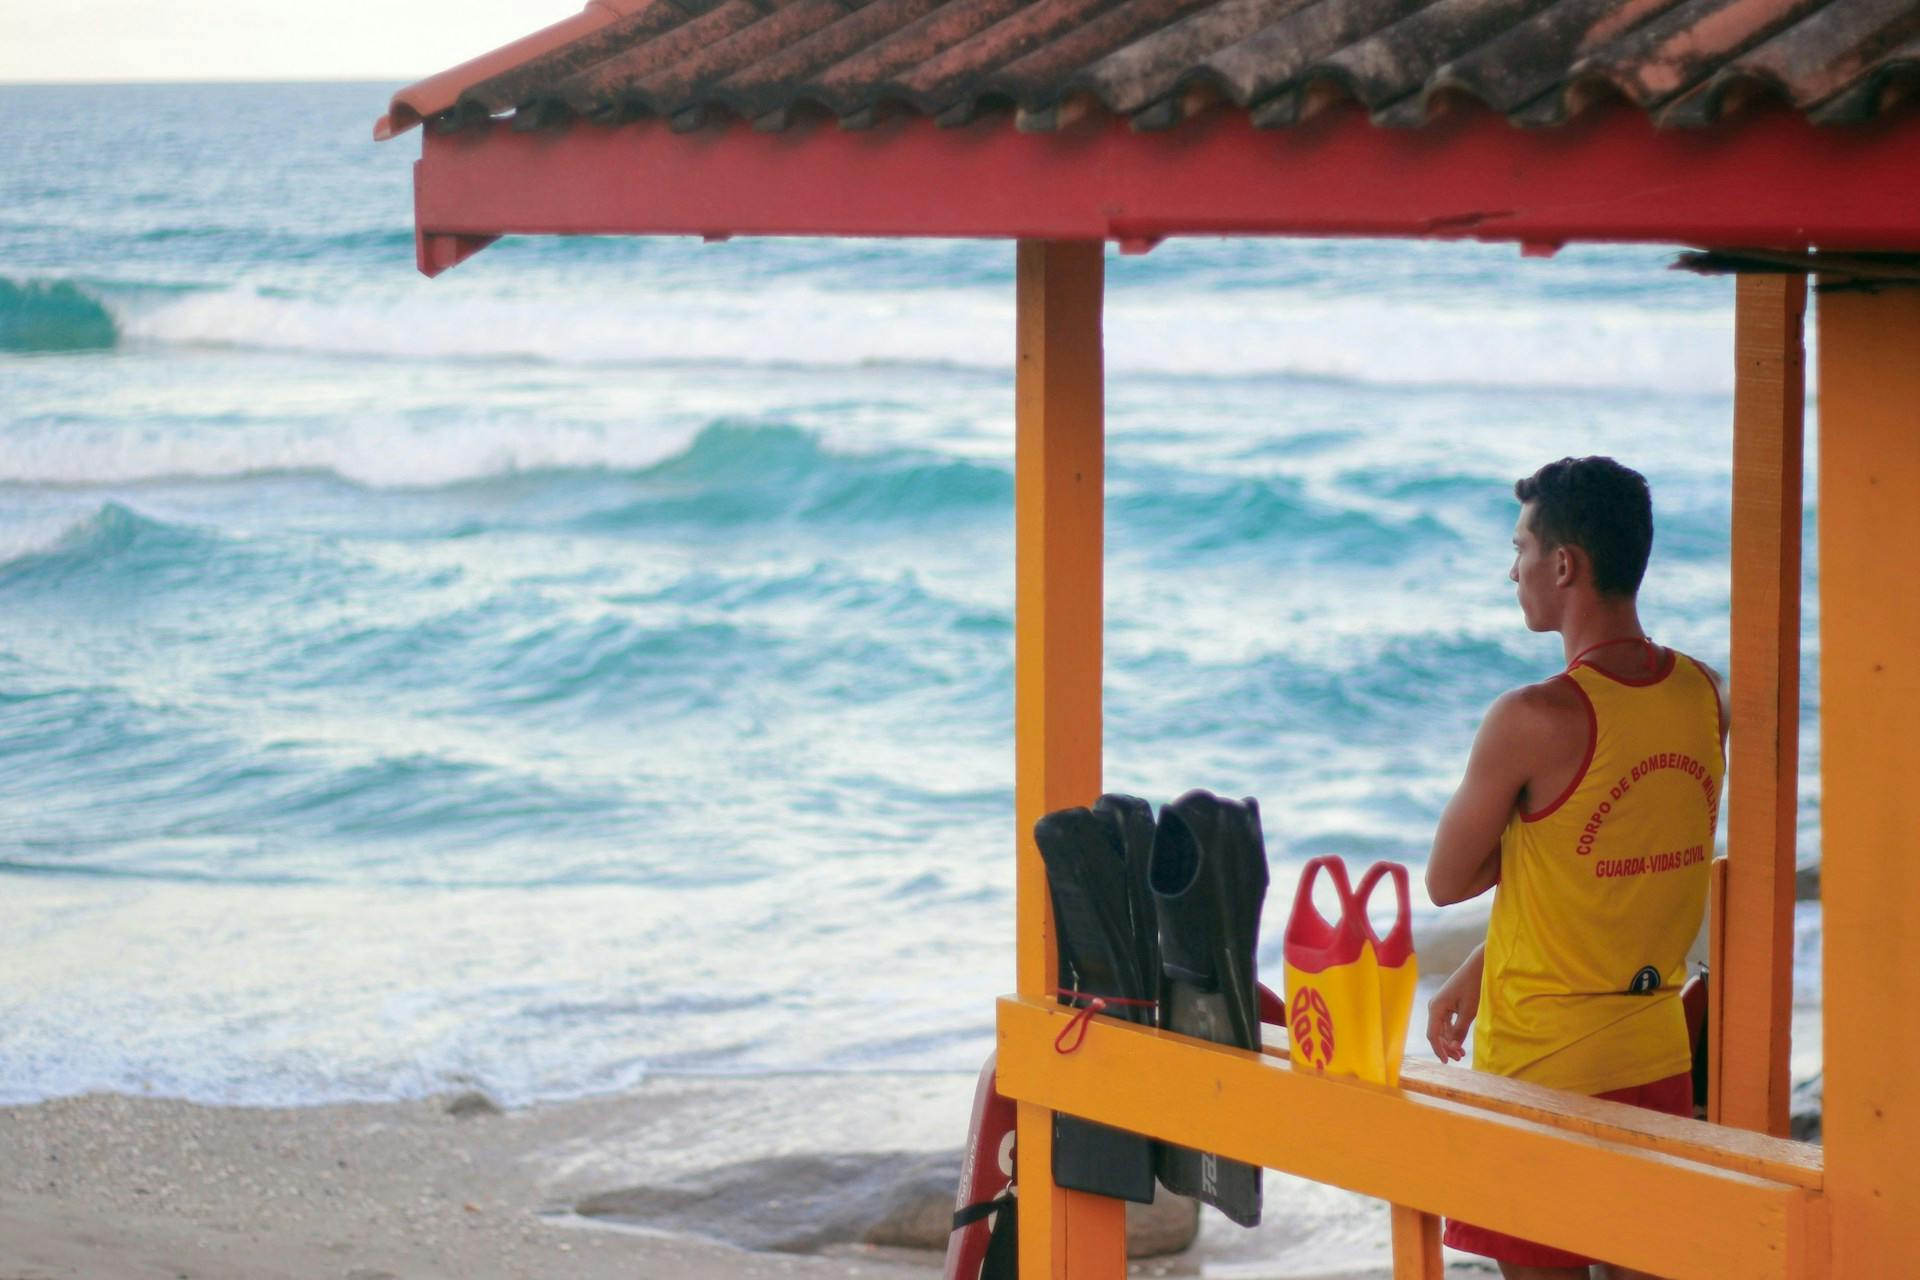 A lifeguard standing at the lifeguard station, looking out at the ocean.